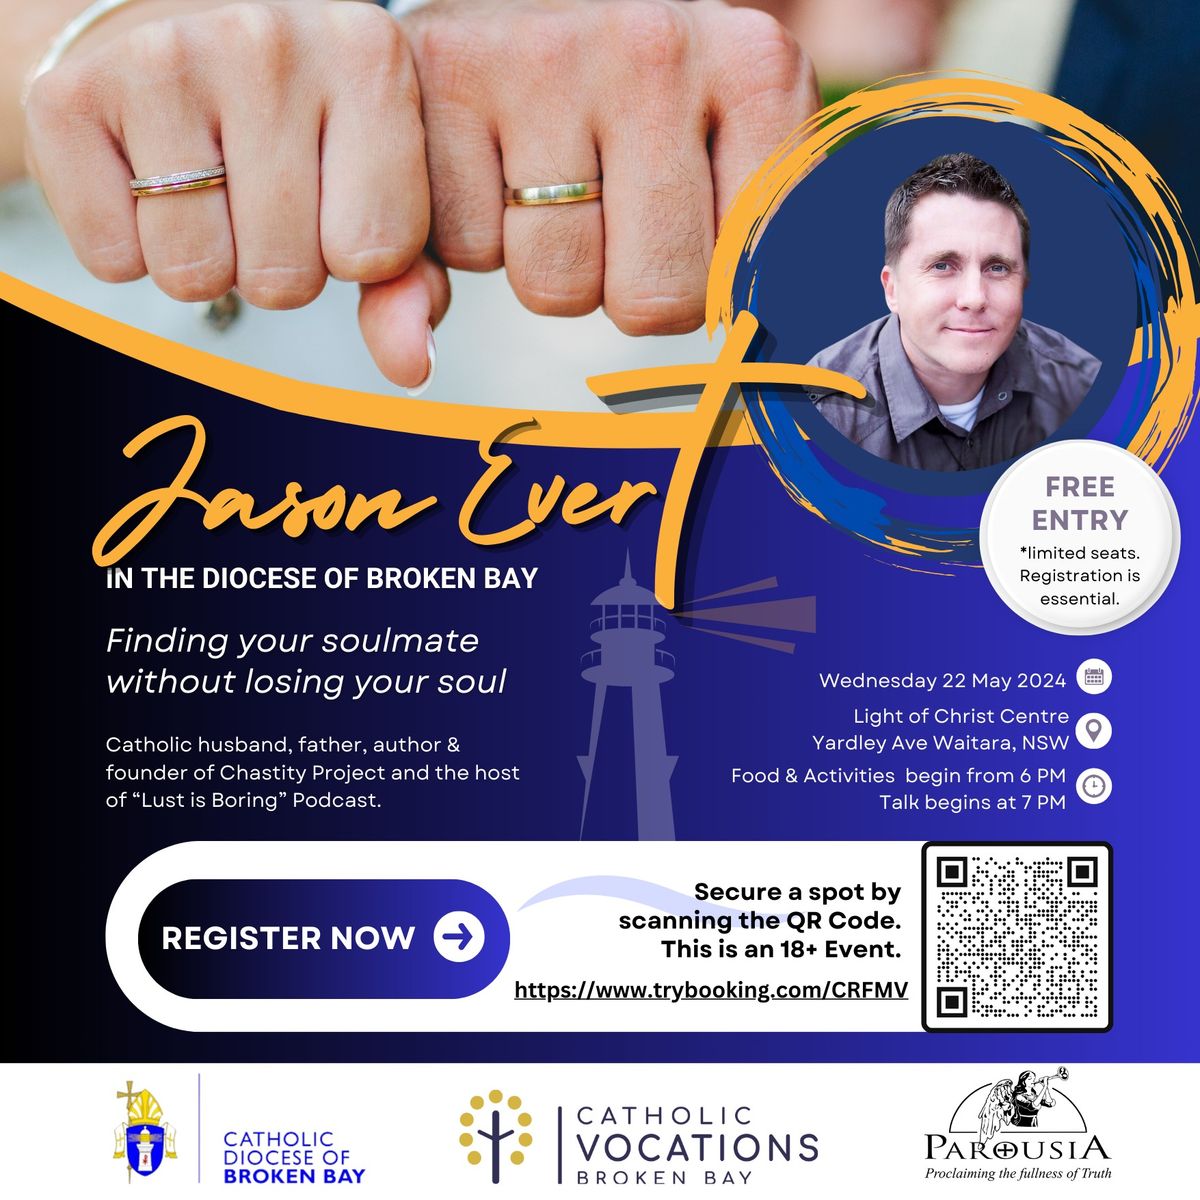 Jason Evert in the Diocese of Broken Bay